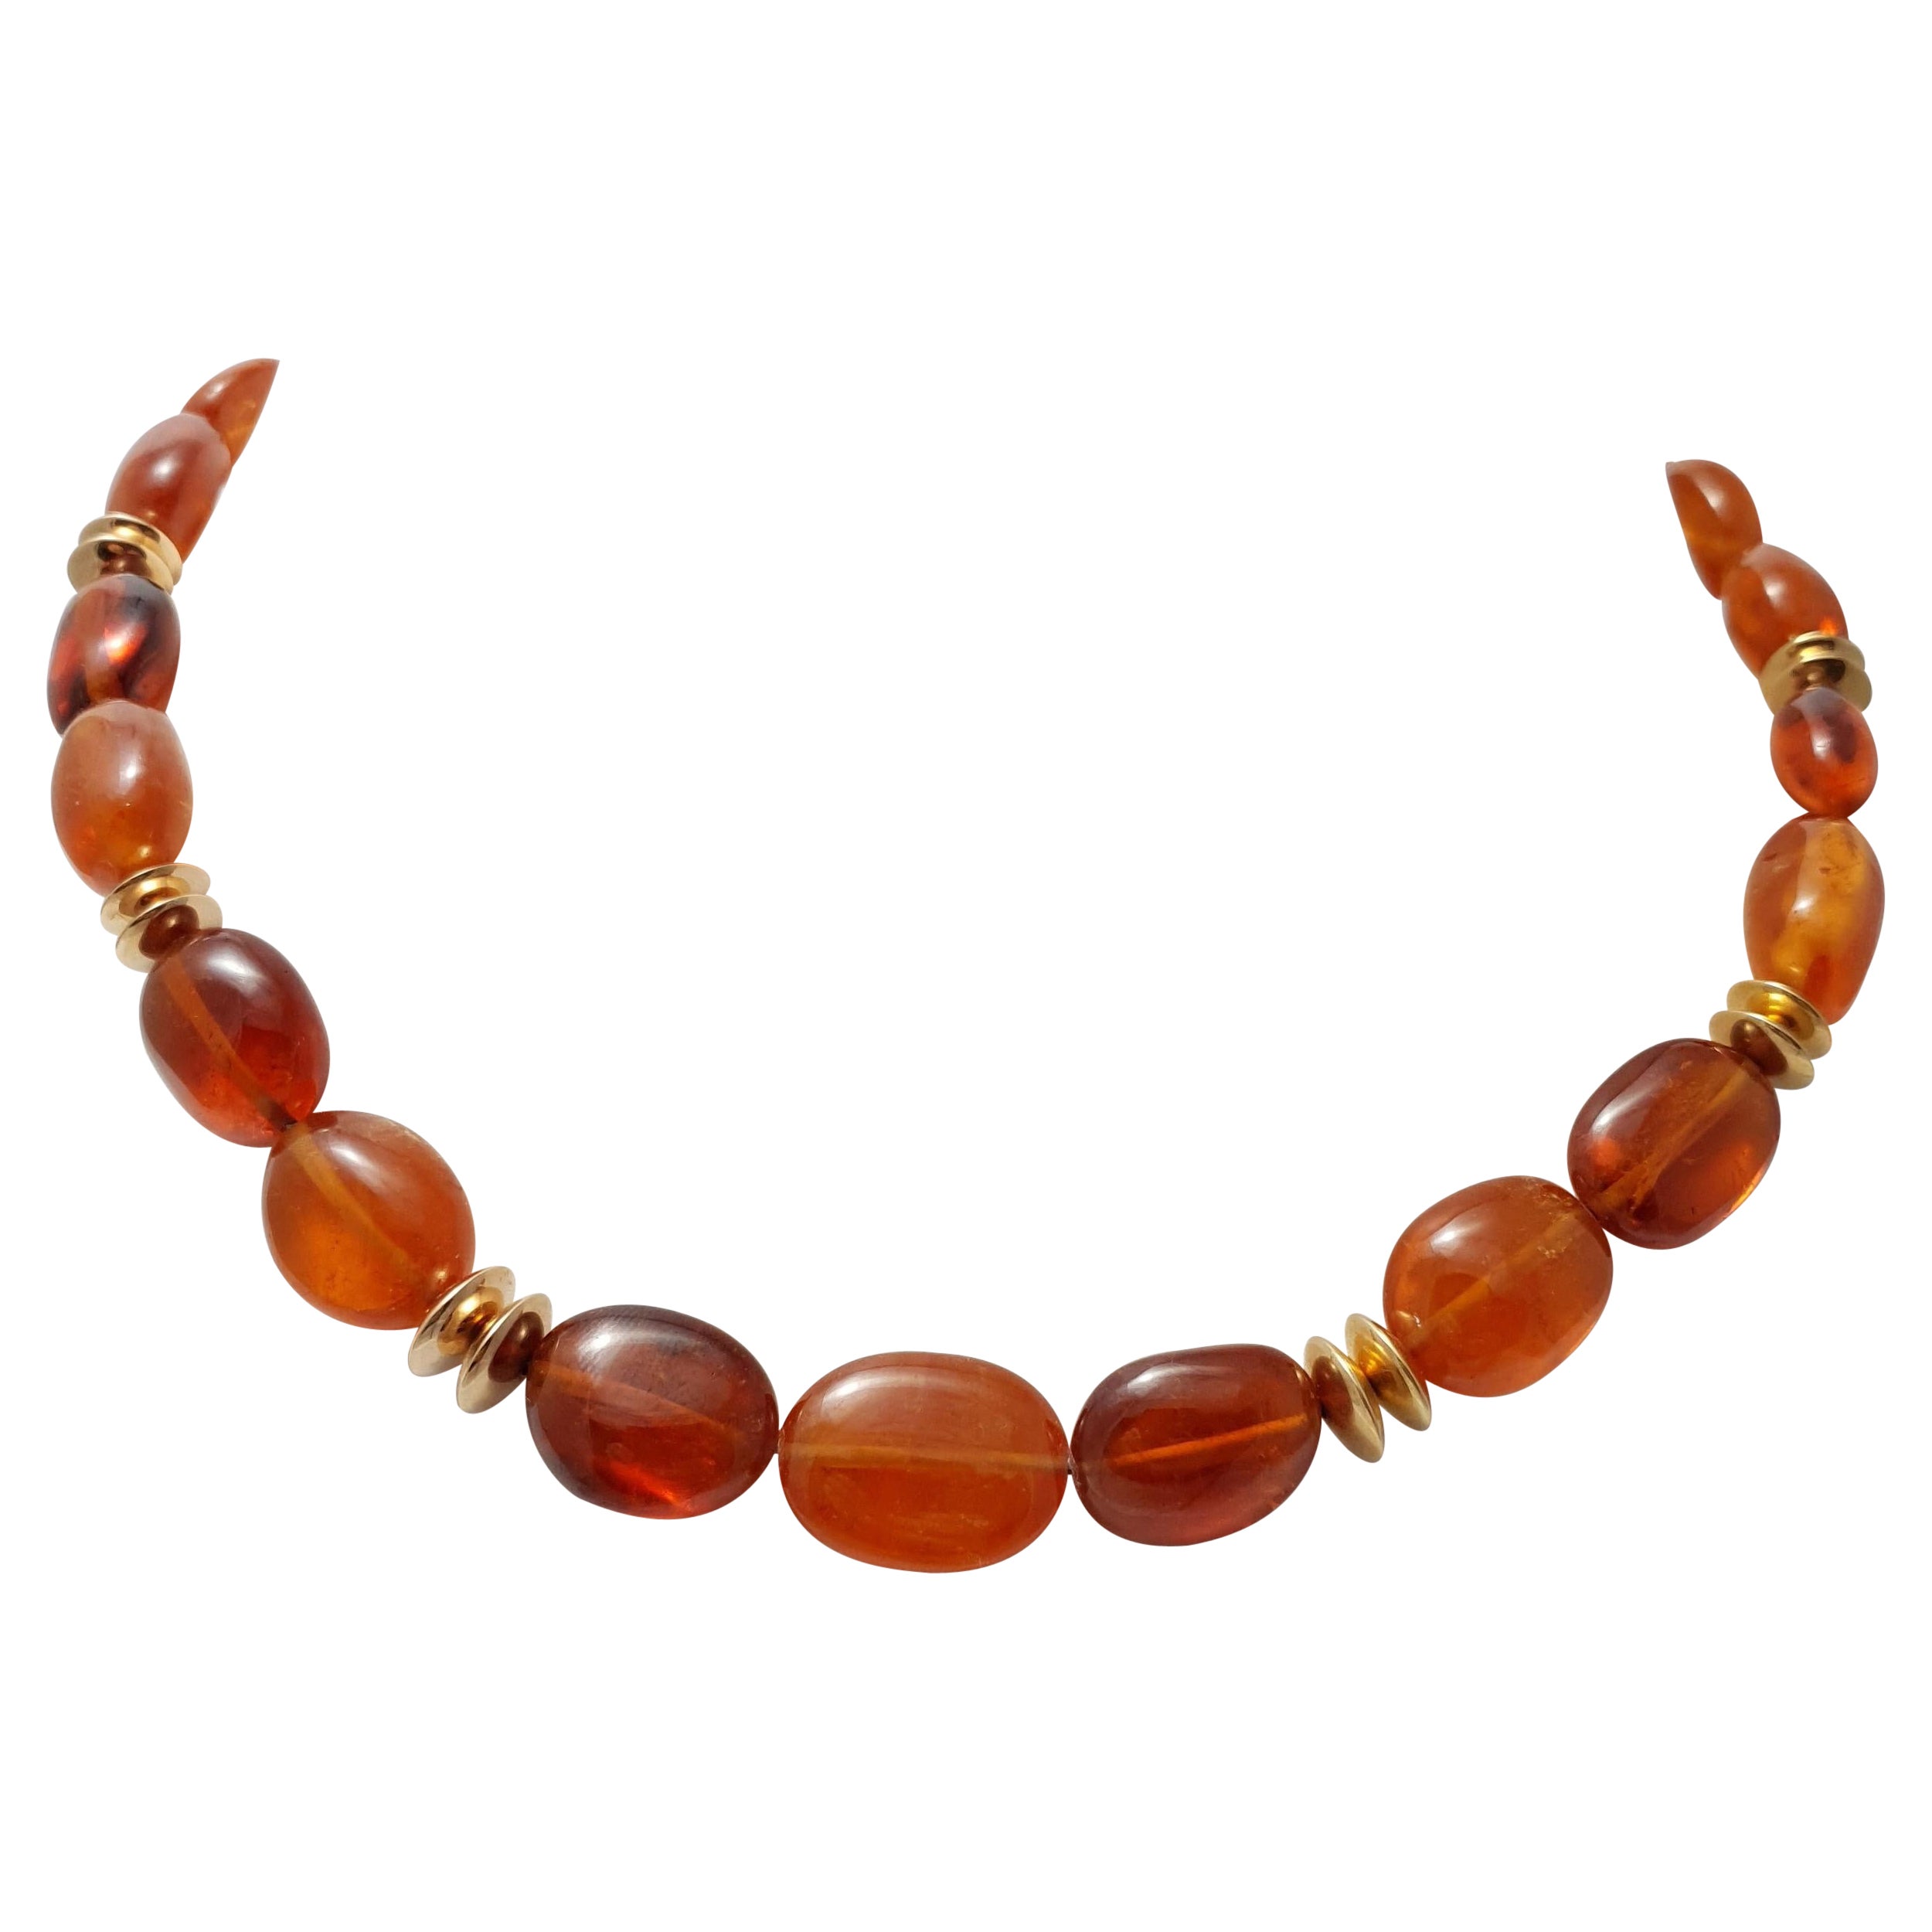 This Natural Orange Spessartite Garnet Baroque Beaded Necklace with 18 Carat Rosé Gold is totally handmade. Cutting as well as goldwork are made in German quality. The screw clasp is easy to handle and very secure.
Timeless and classic design